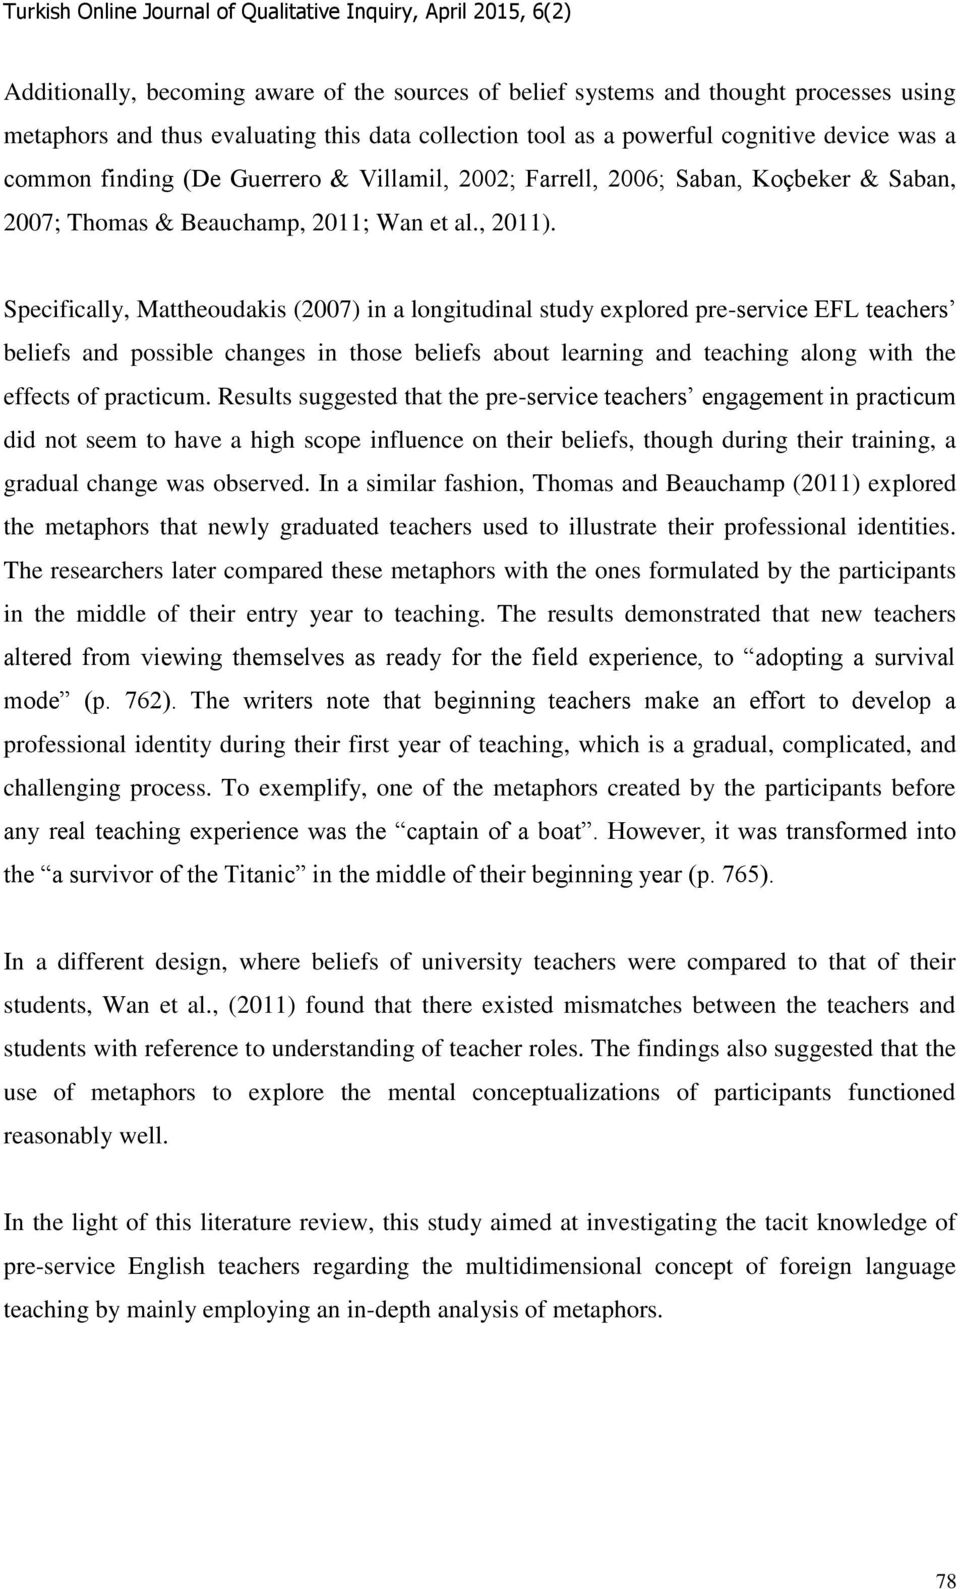 Specifically, Mattheoudakis (2007) in a longitudinal study explored pre-service EFL teachers beliefs and possible changes in those beliefs about learning and teaching along with the effects of